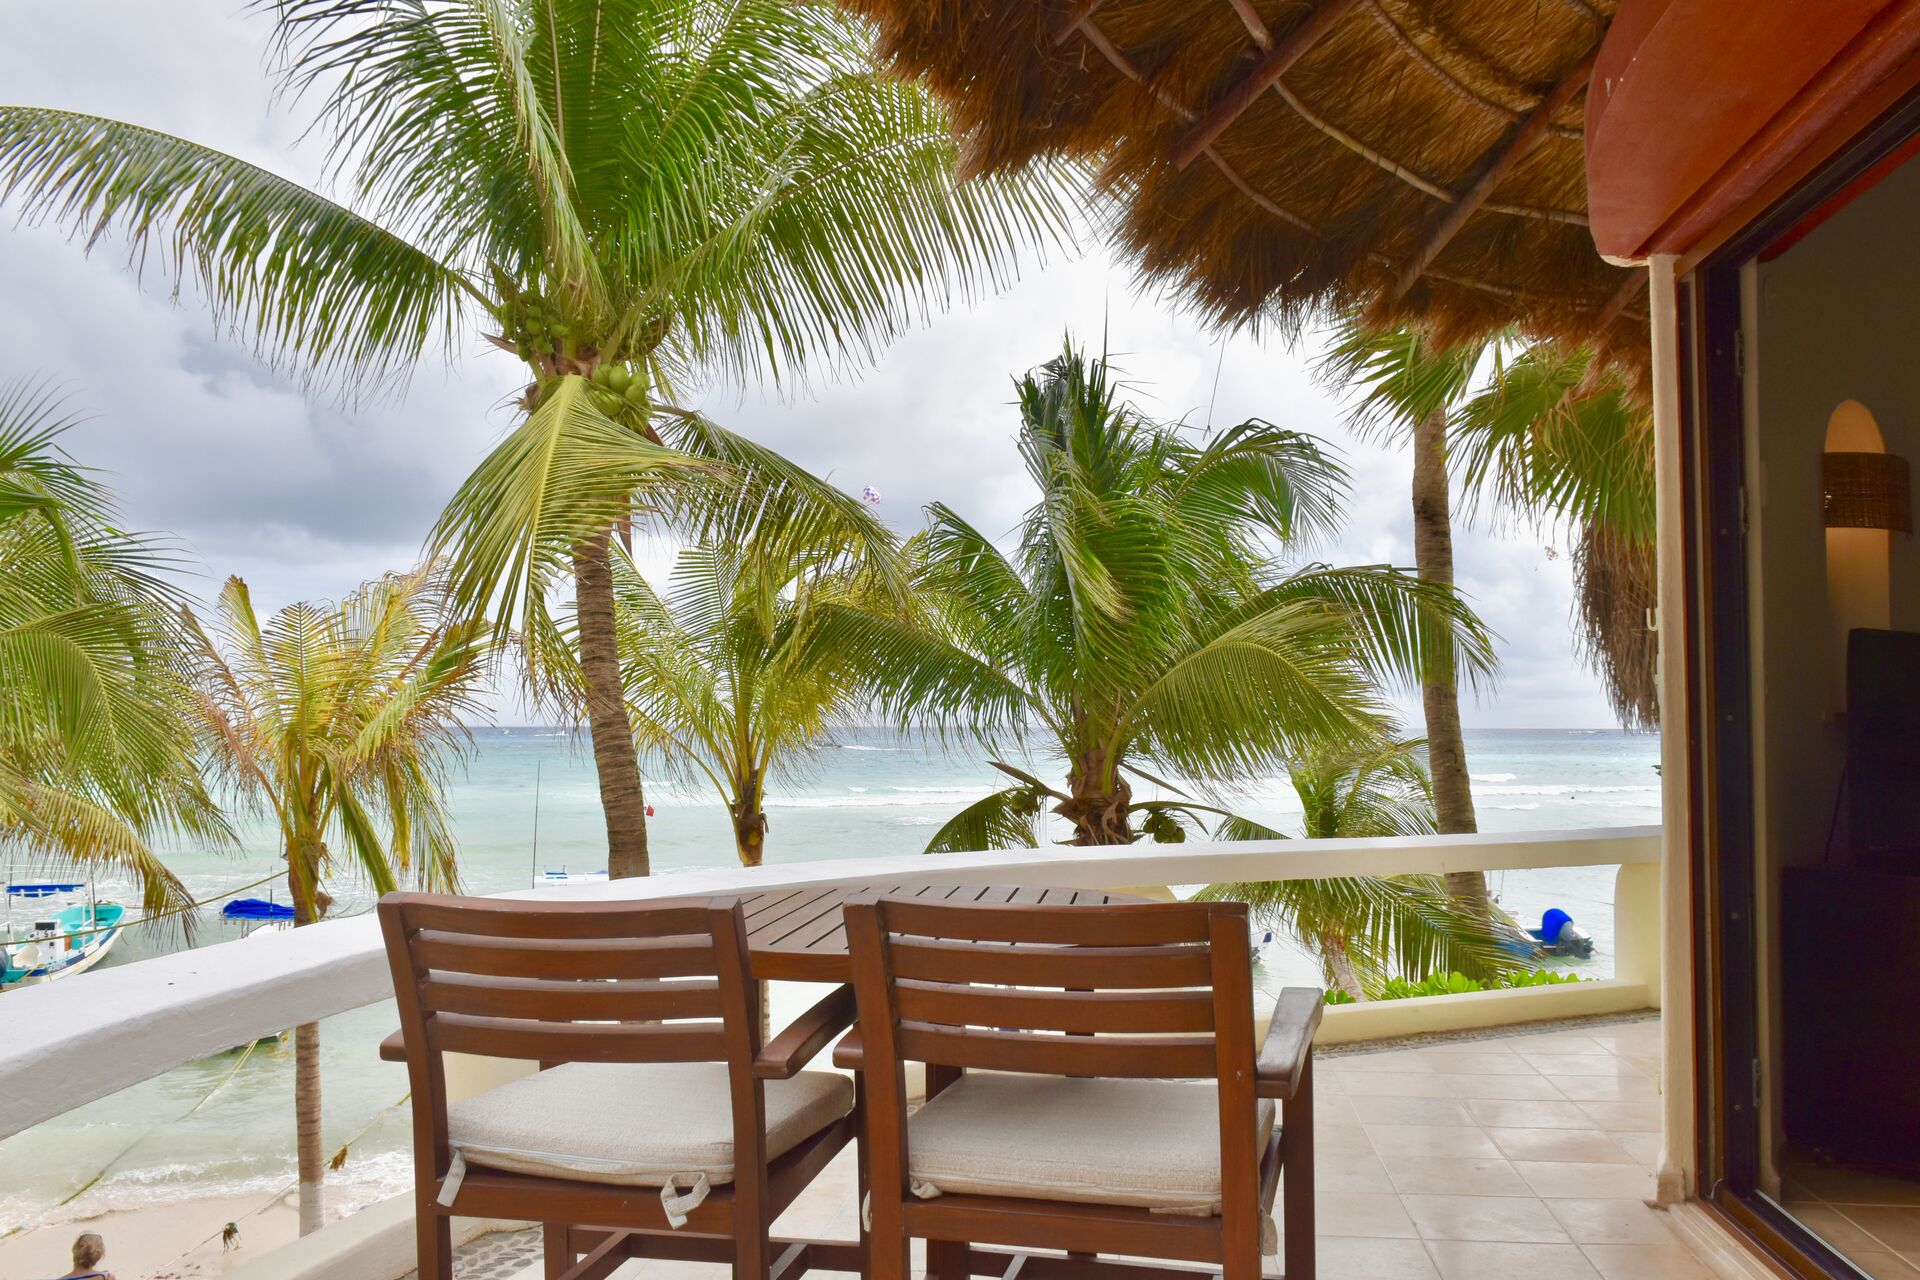 Ocean front suite, incredible ocean view balcony with chairs and hammock.